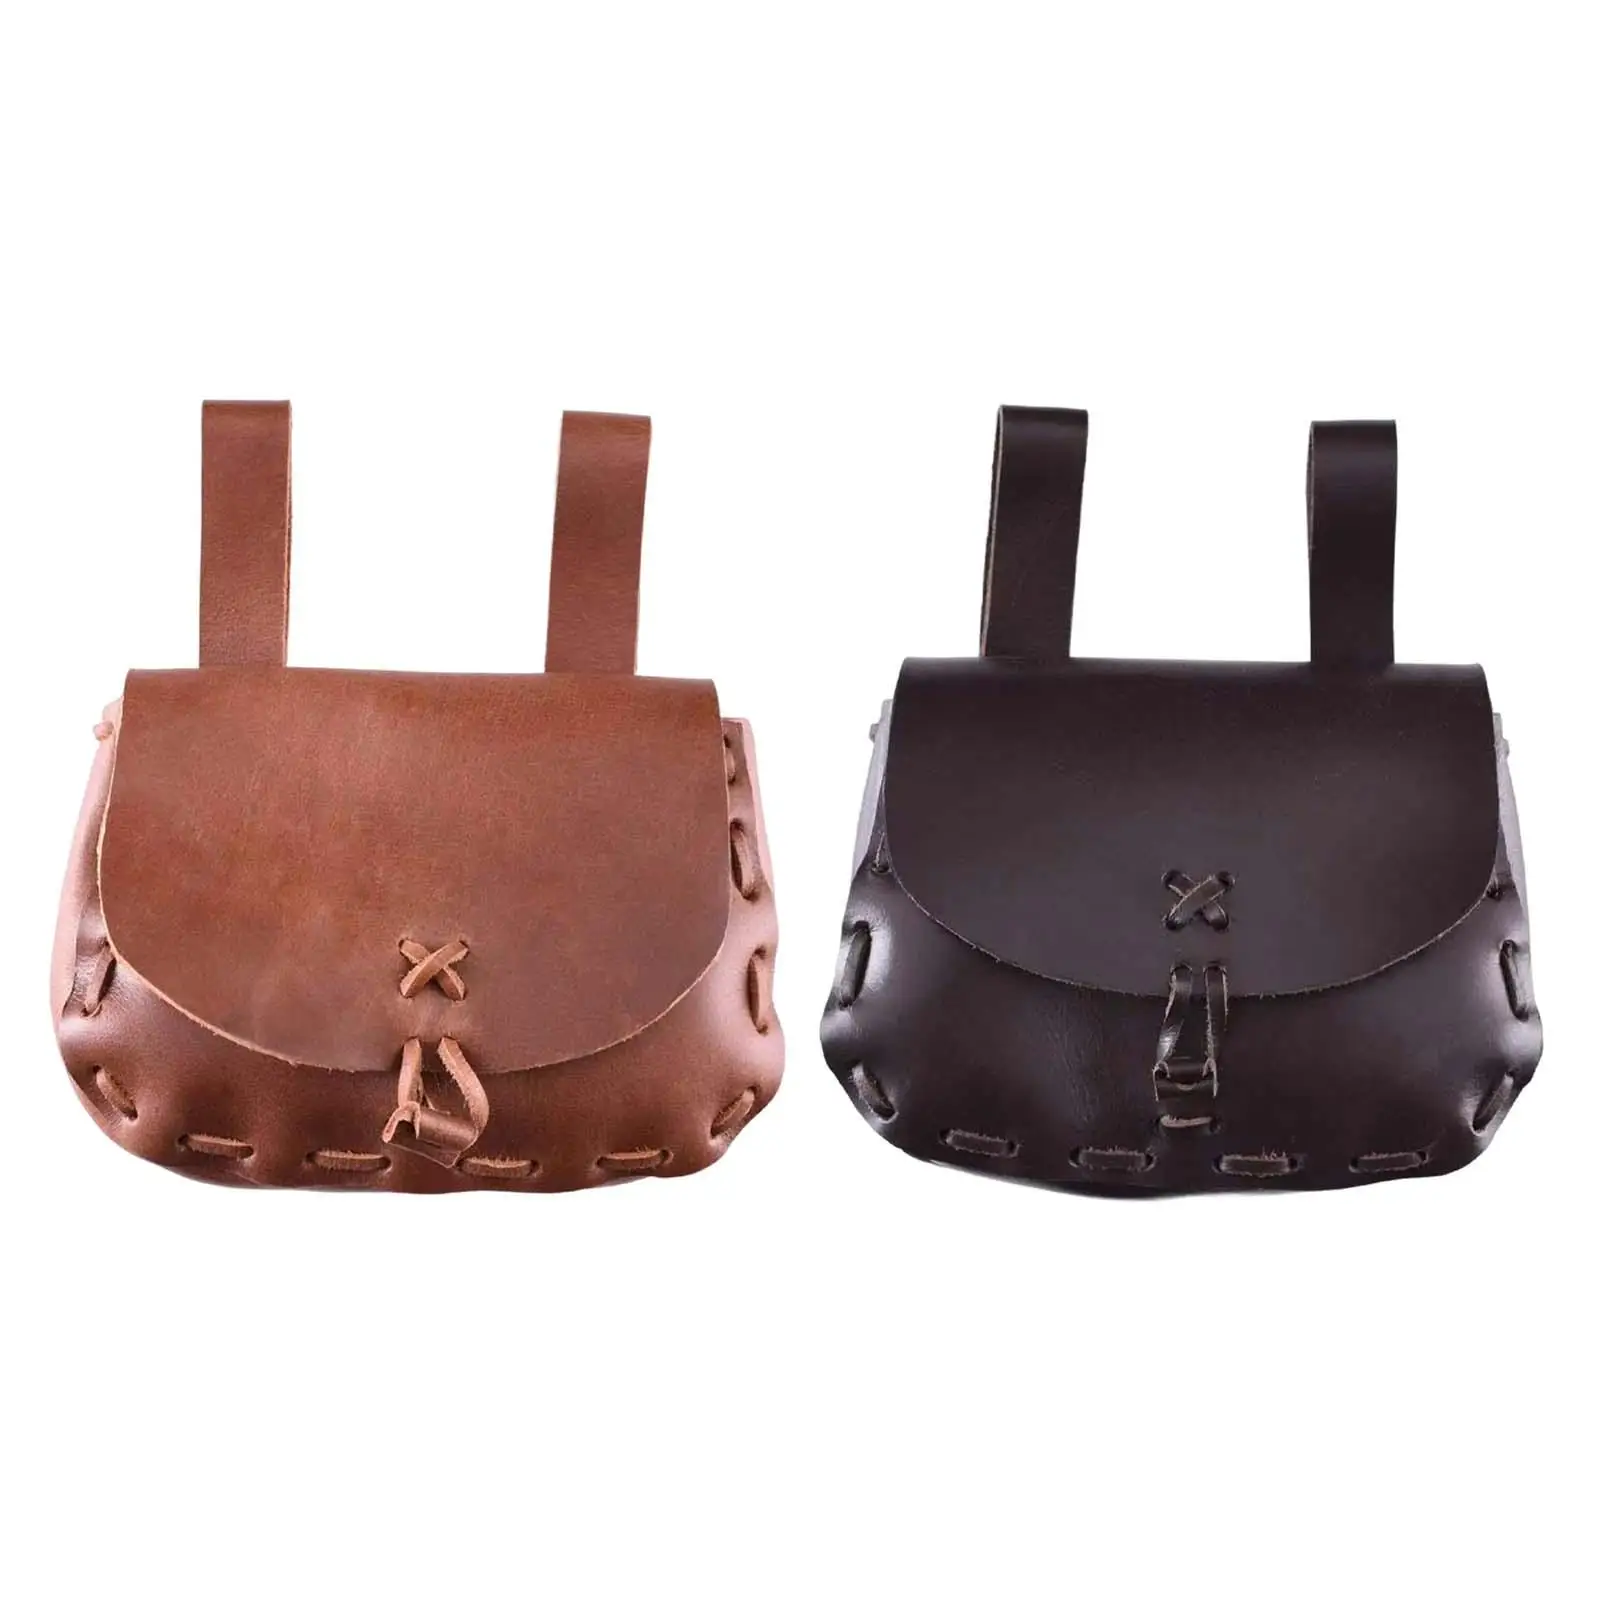 PU Leather Retro Waist Pouch Bag Medieval Waterproof Vintage Waist Purse Wallet for Travel Hiking Summer Cosplay Party Men Women